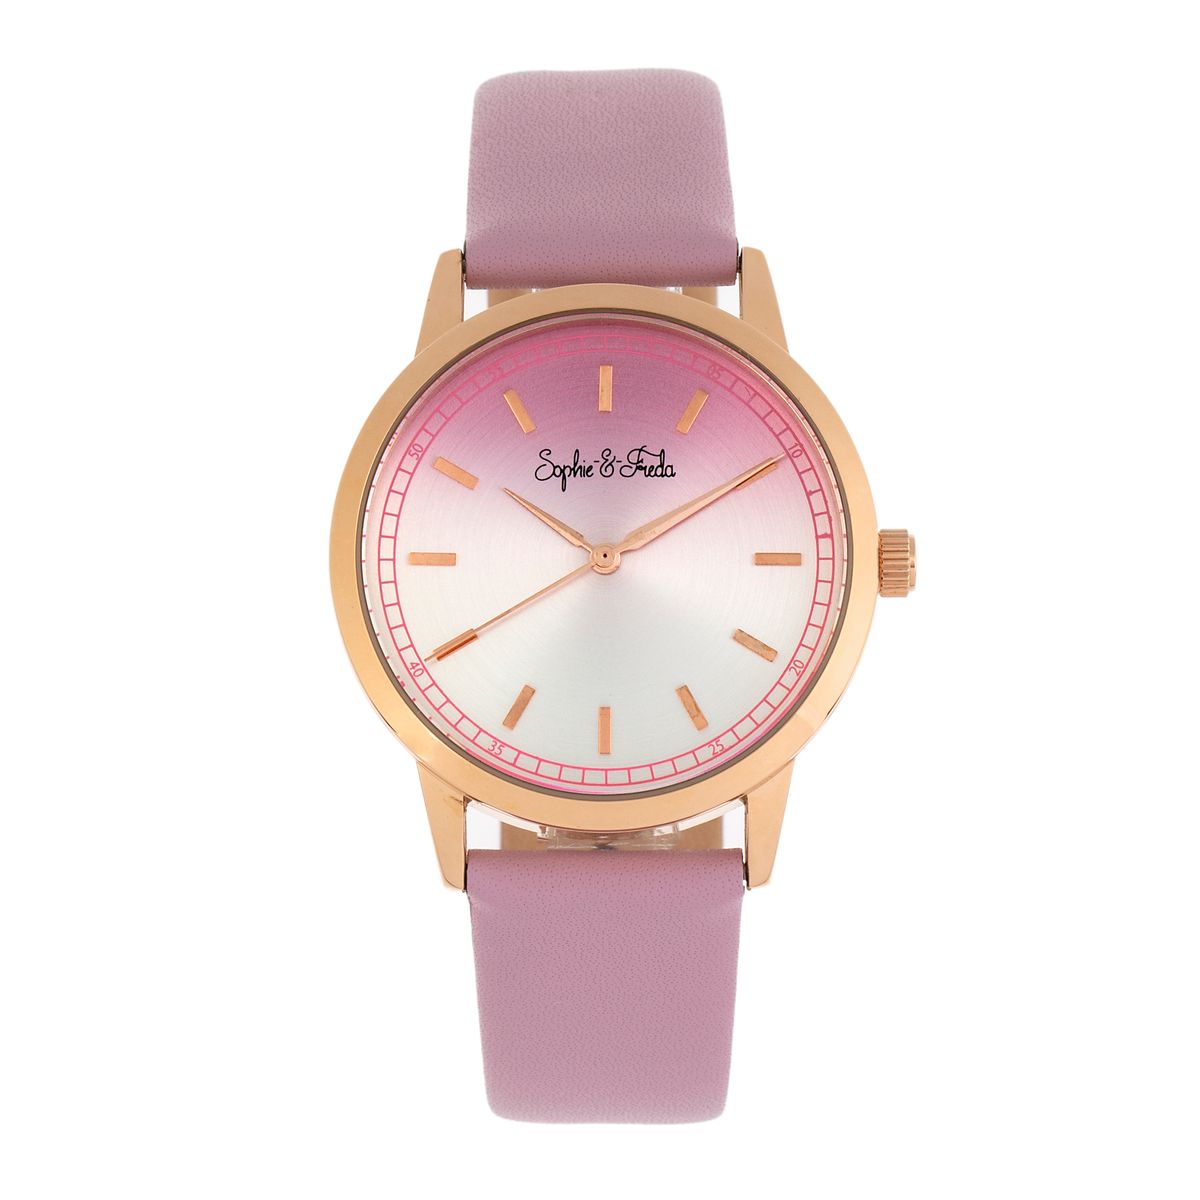 Photos - Wrist Watch Sophie & Freda Sophie and Freda™ San Diego Leather Band Watch, 36mm - Pink